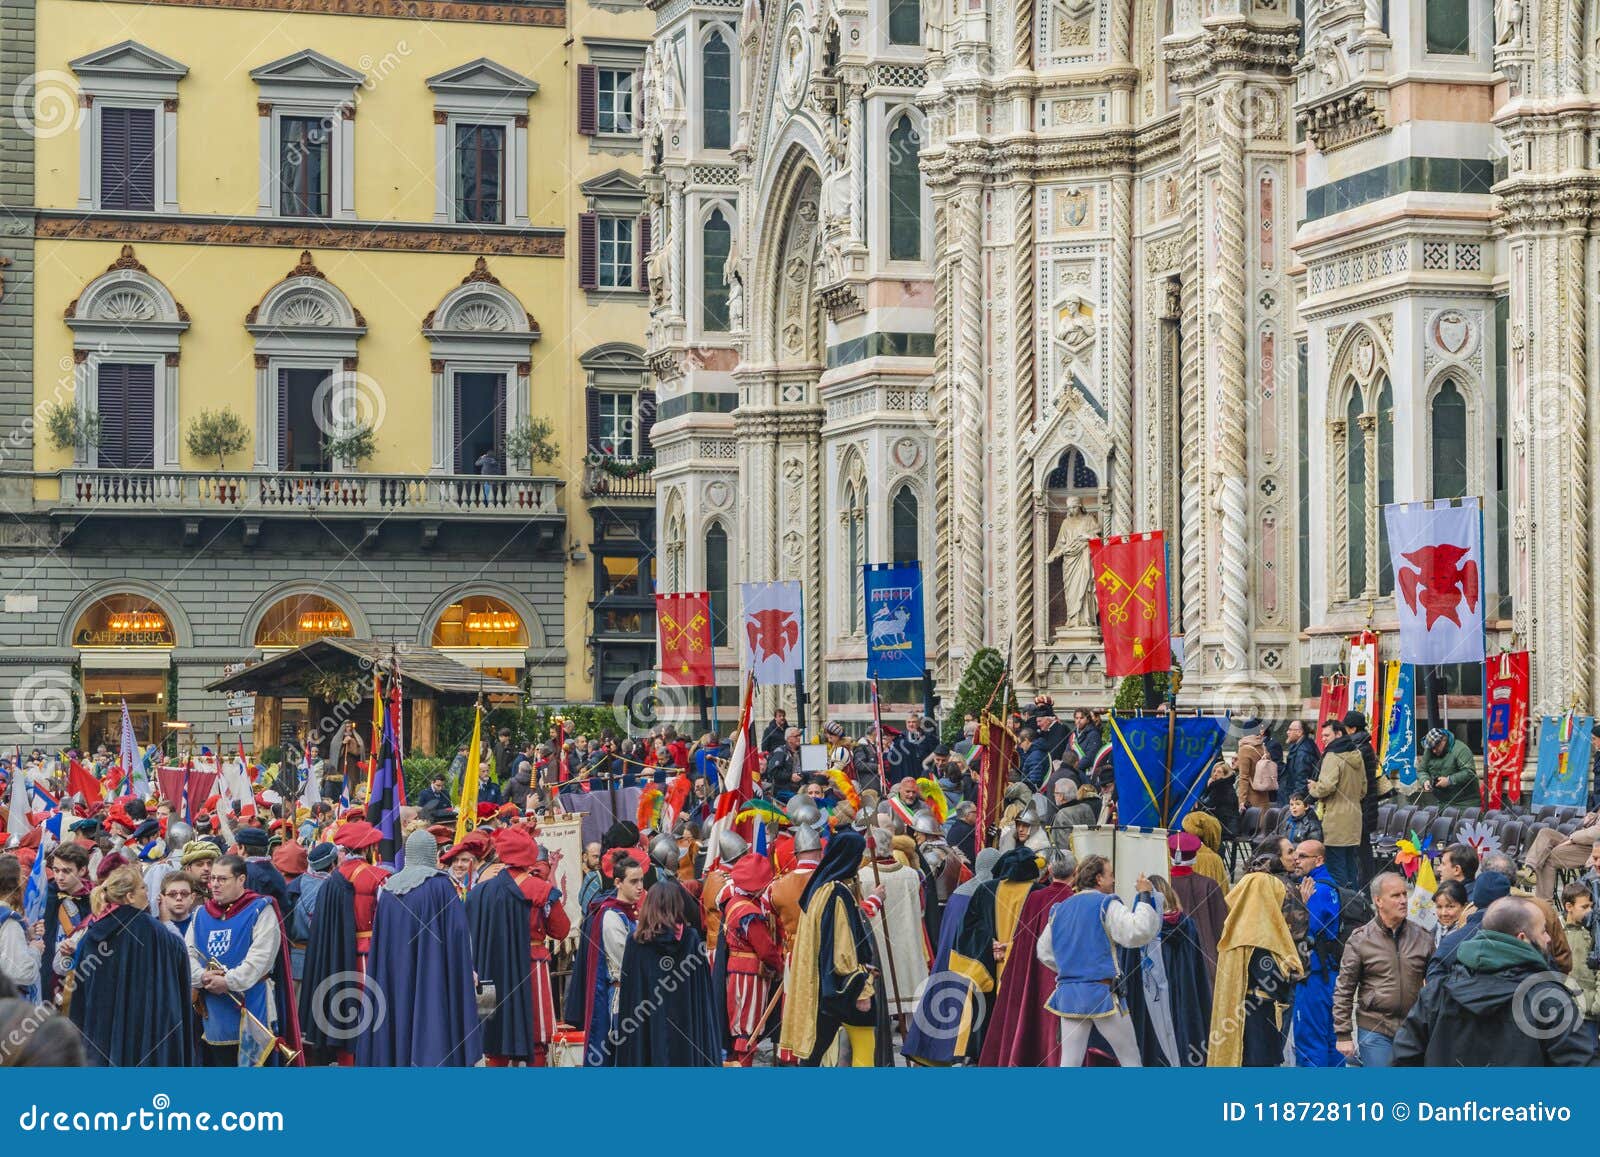 January 6 Traditional Celebration at Florence, Italy Editorial Image